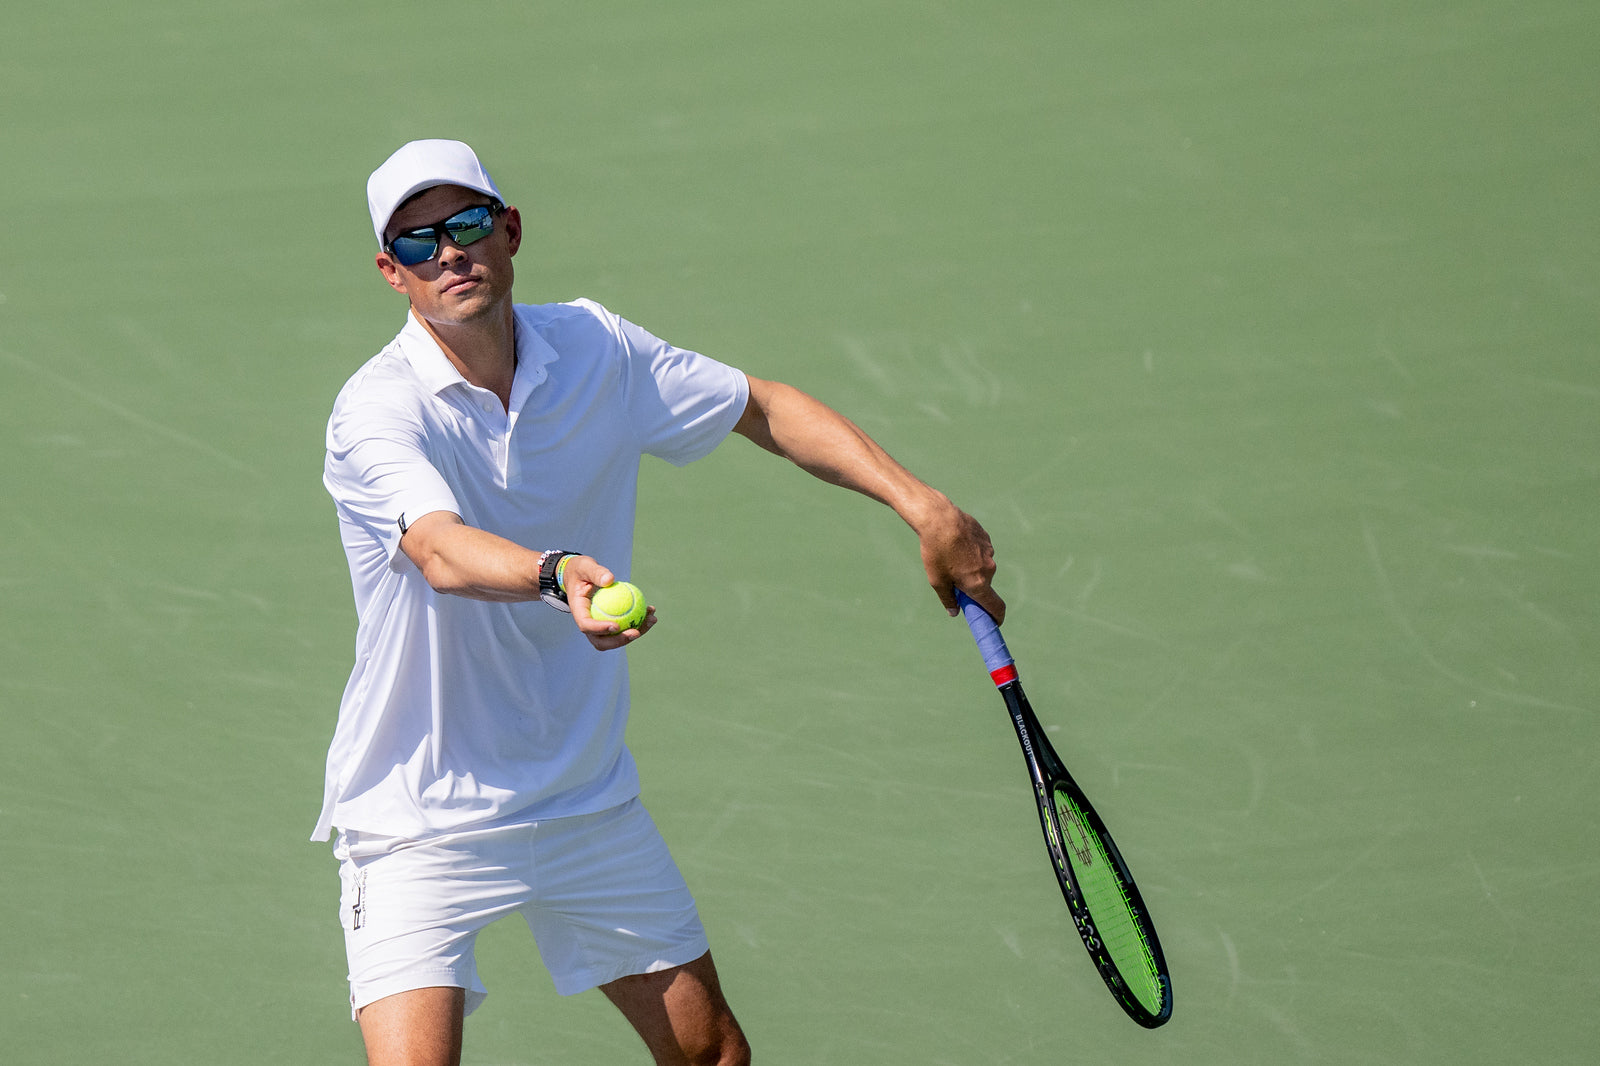 UV Protection: An Essential For Racquet Sports and Golf